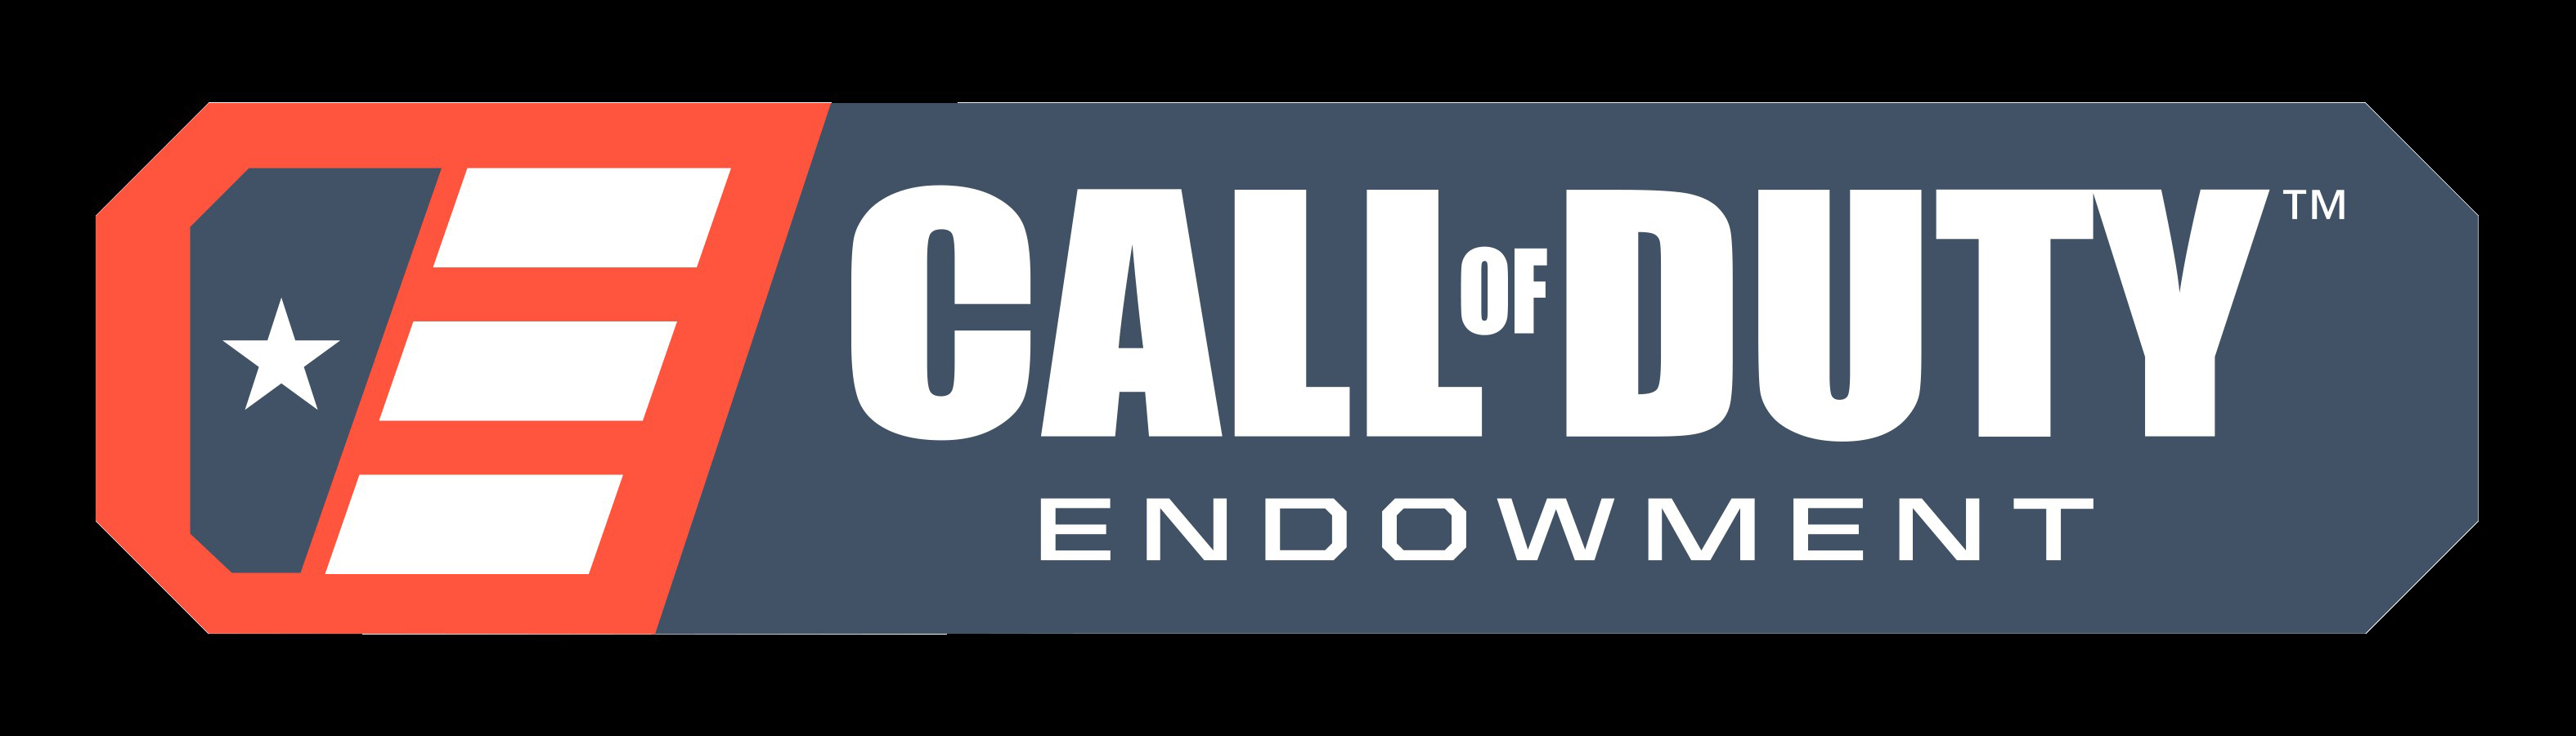 Call Of Duty: WWII - Call Of Duty Endowment Fear Not Personalization Pack (Activision/Blizzard)